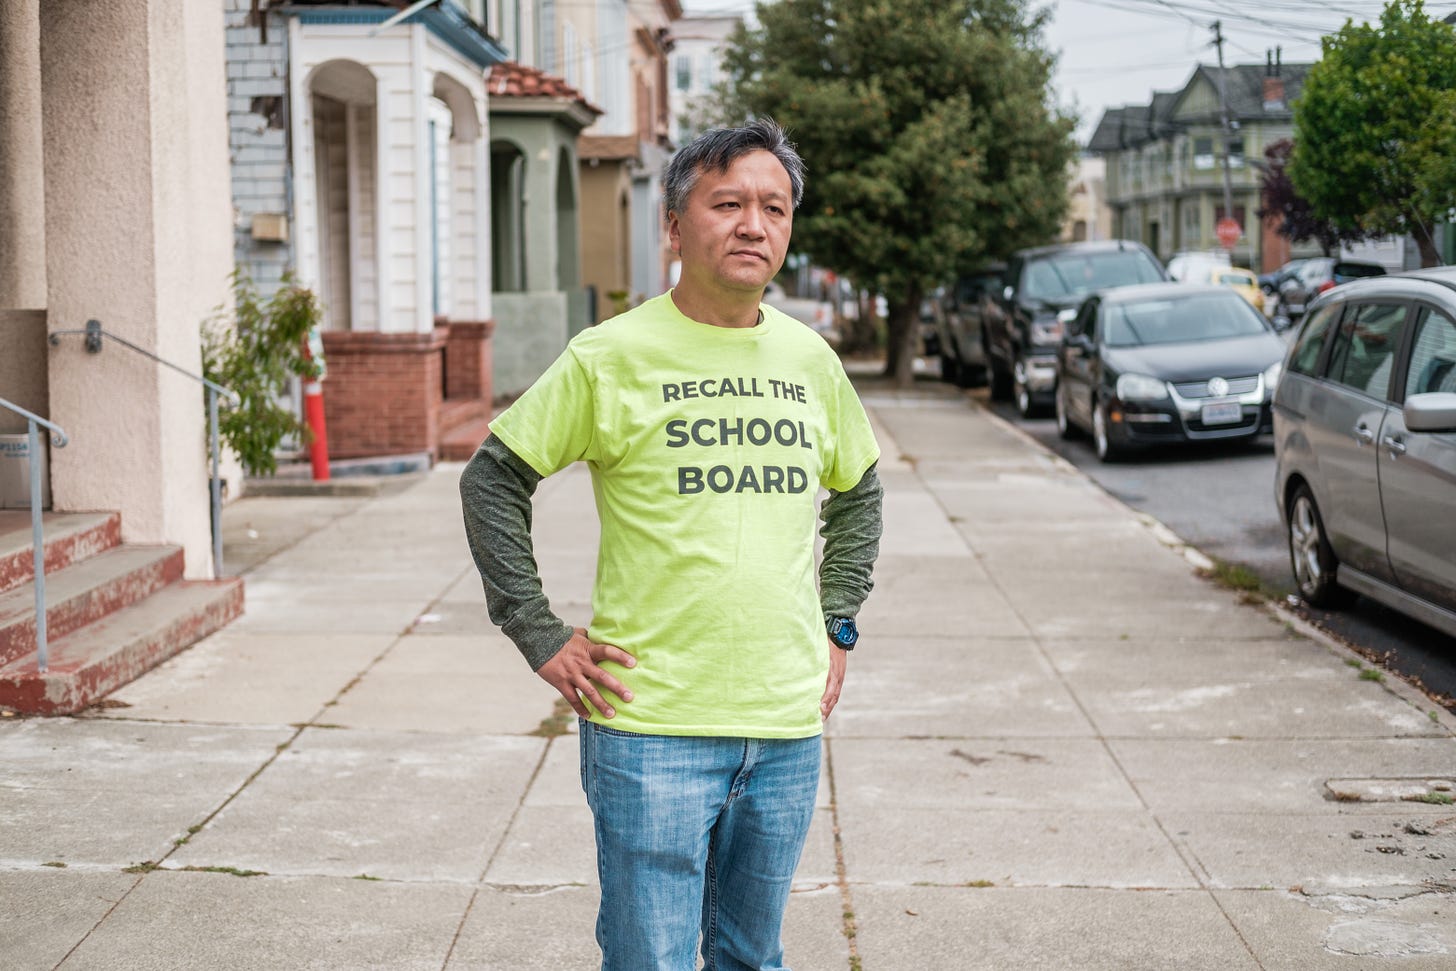 Kit Lam, a Chinese man, stands on a sidewalk with his hands at his hips, wearing a shirt that says "RECALL THE SCHOOL BOARD"